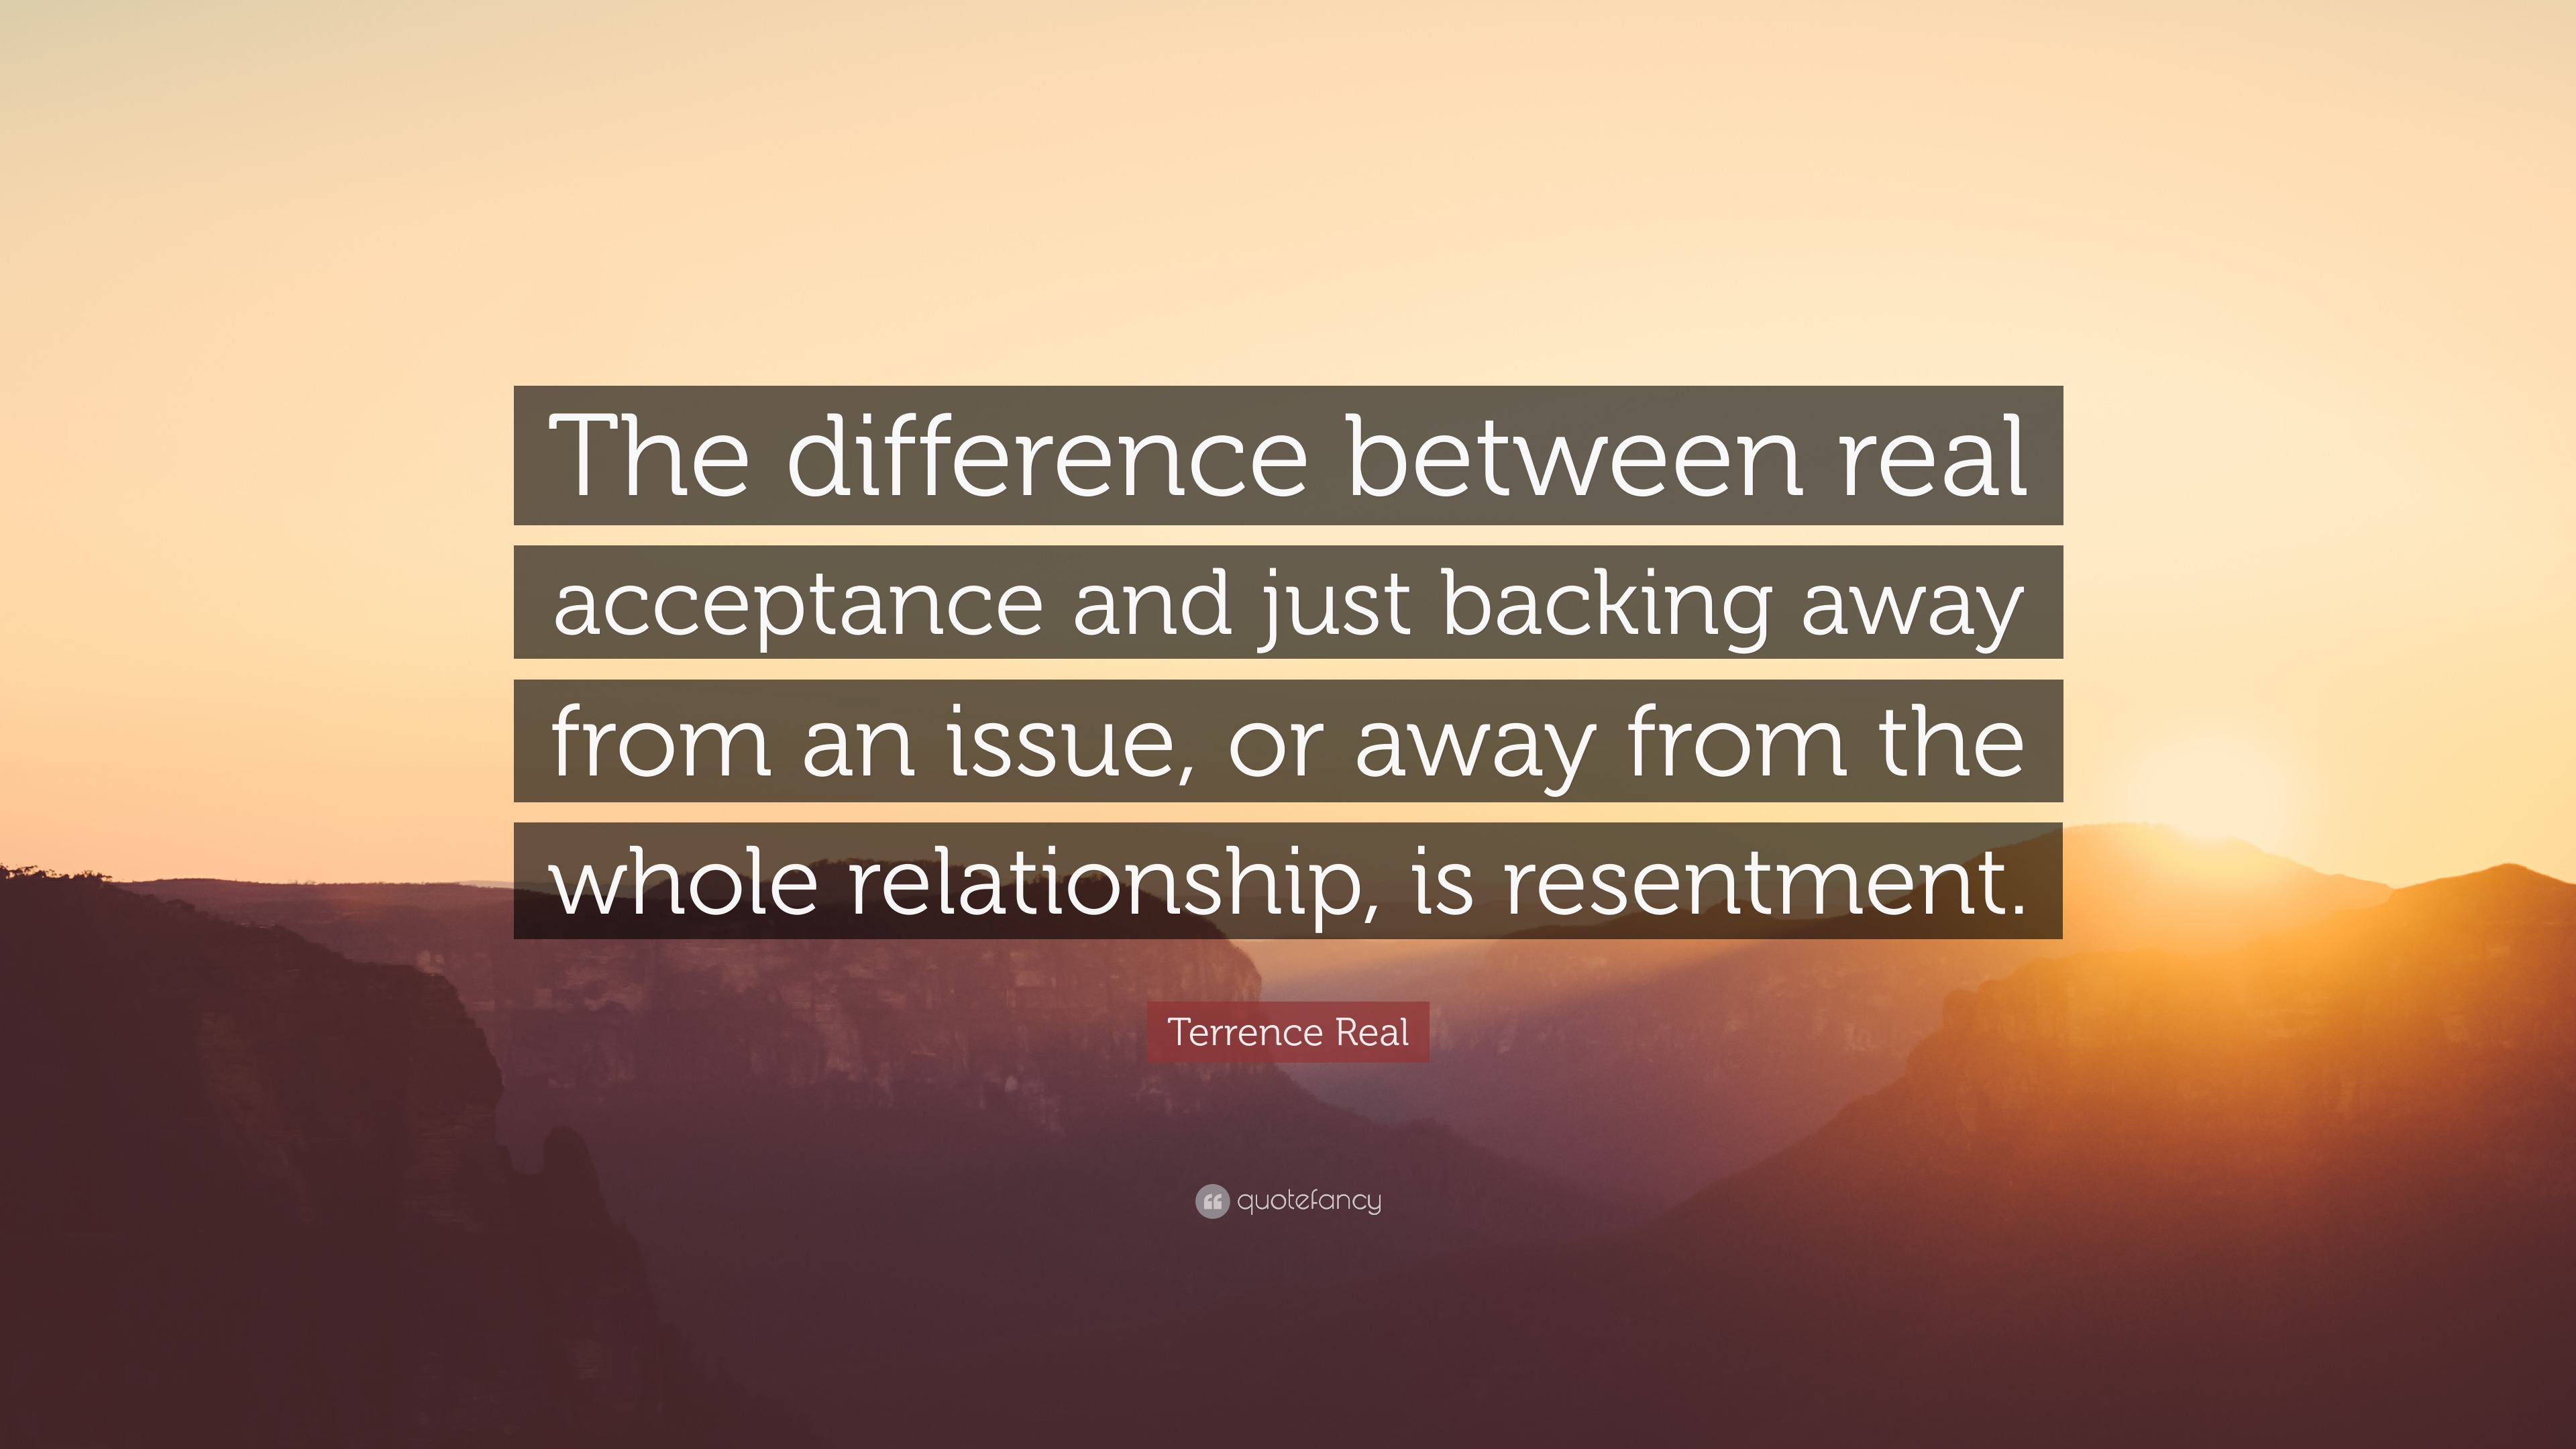 Terrence Real Quote: “The difference between real acceptance and